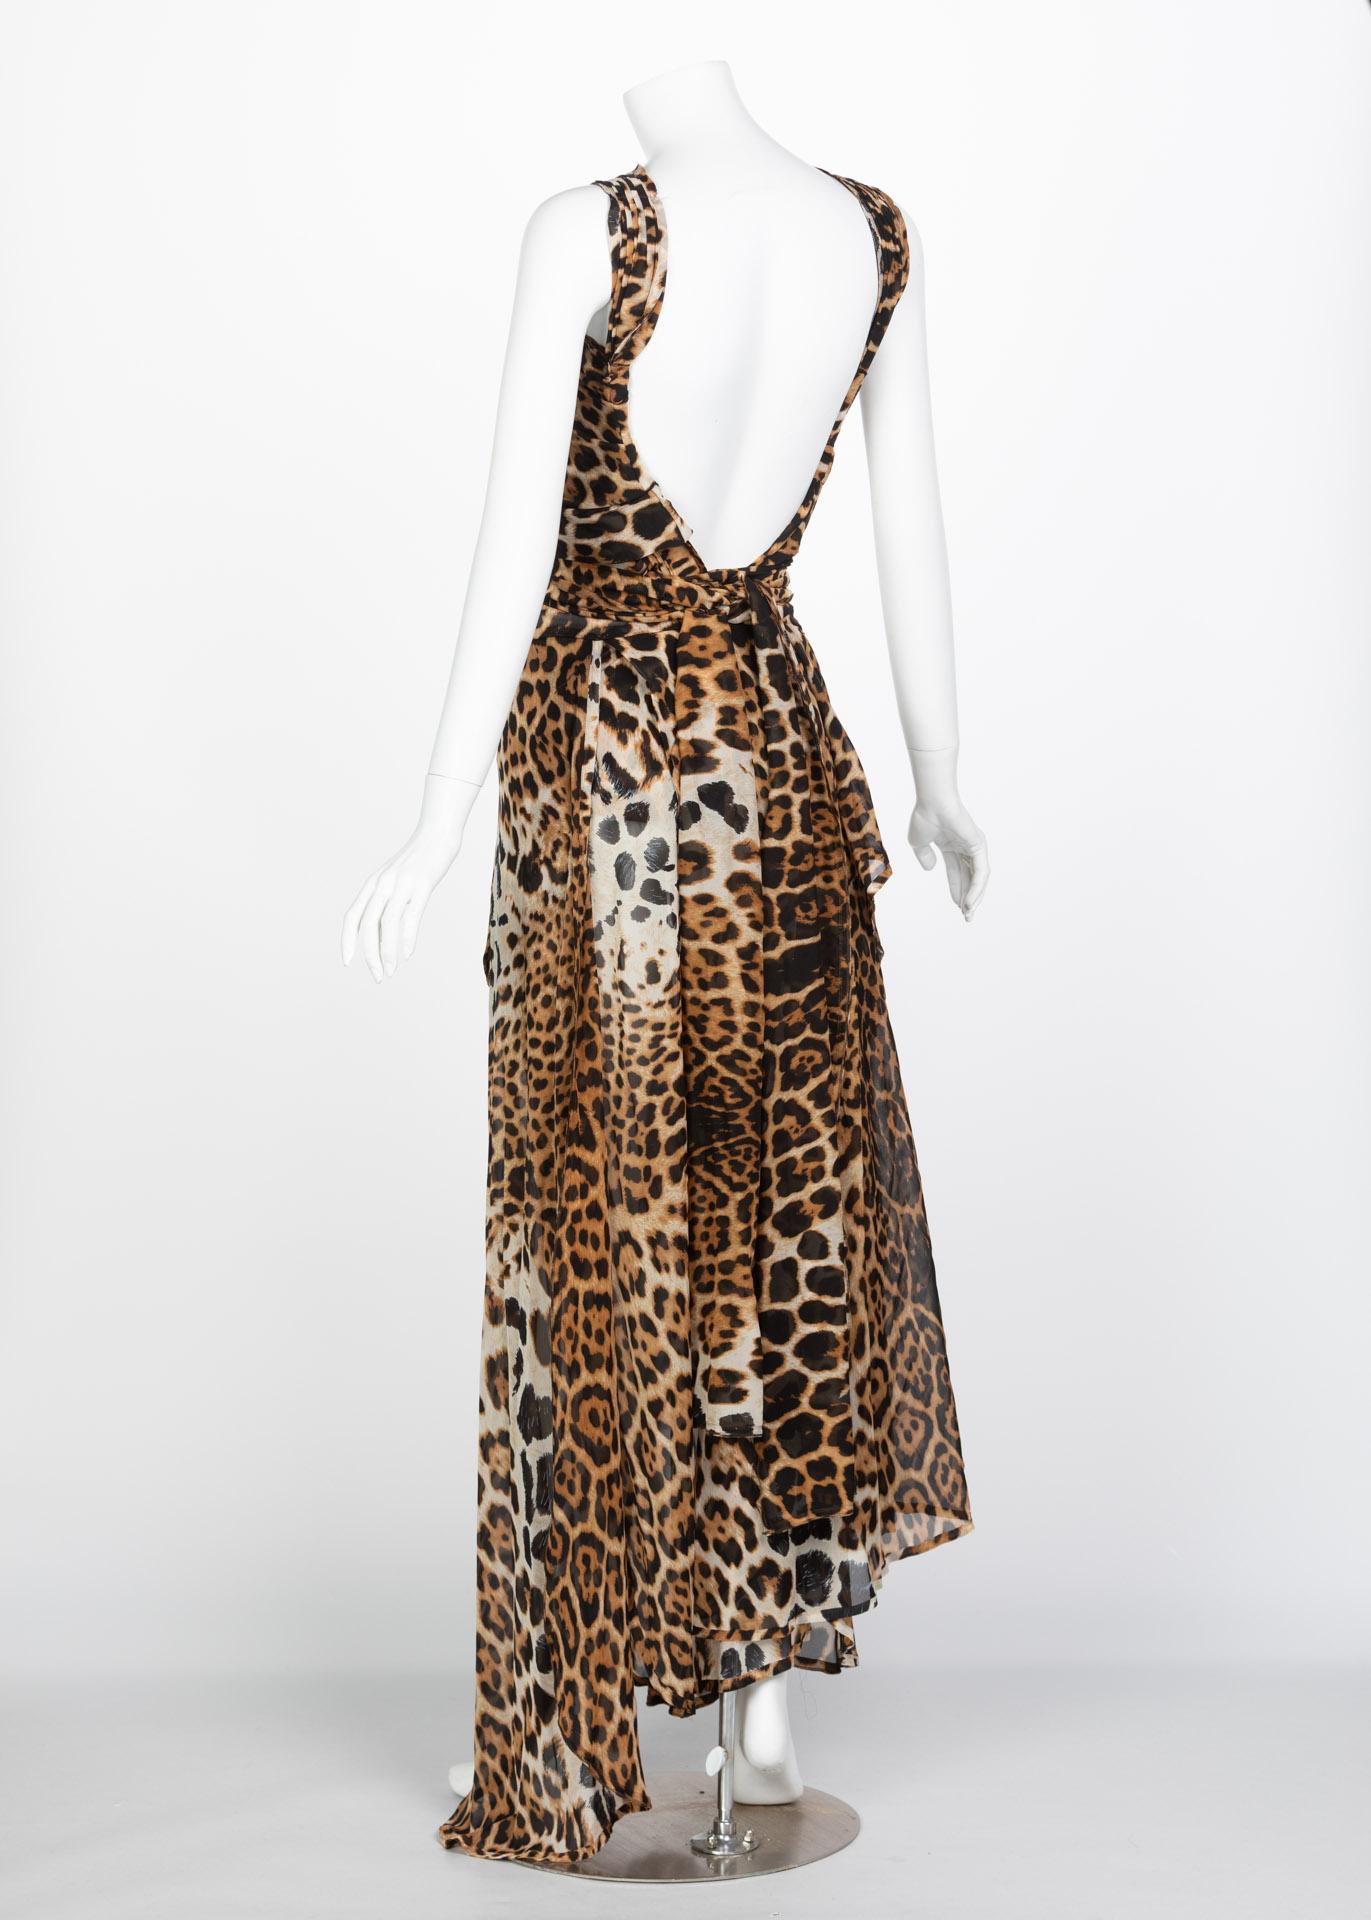  Yves Saint Laurent by Tom Ford Silk Leopard Cut Out Maxi Dress YSL, 2002  10